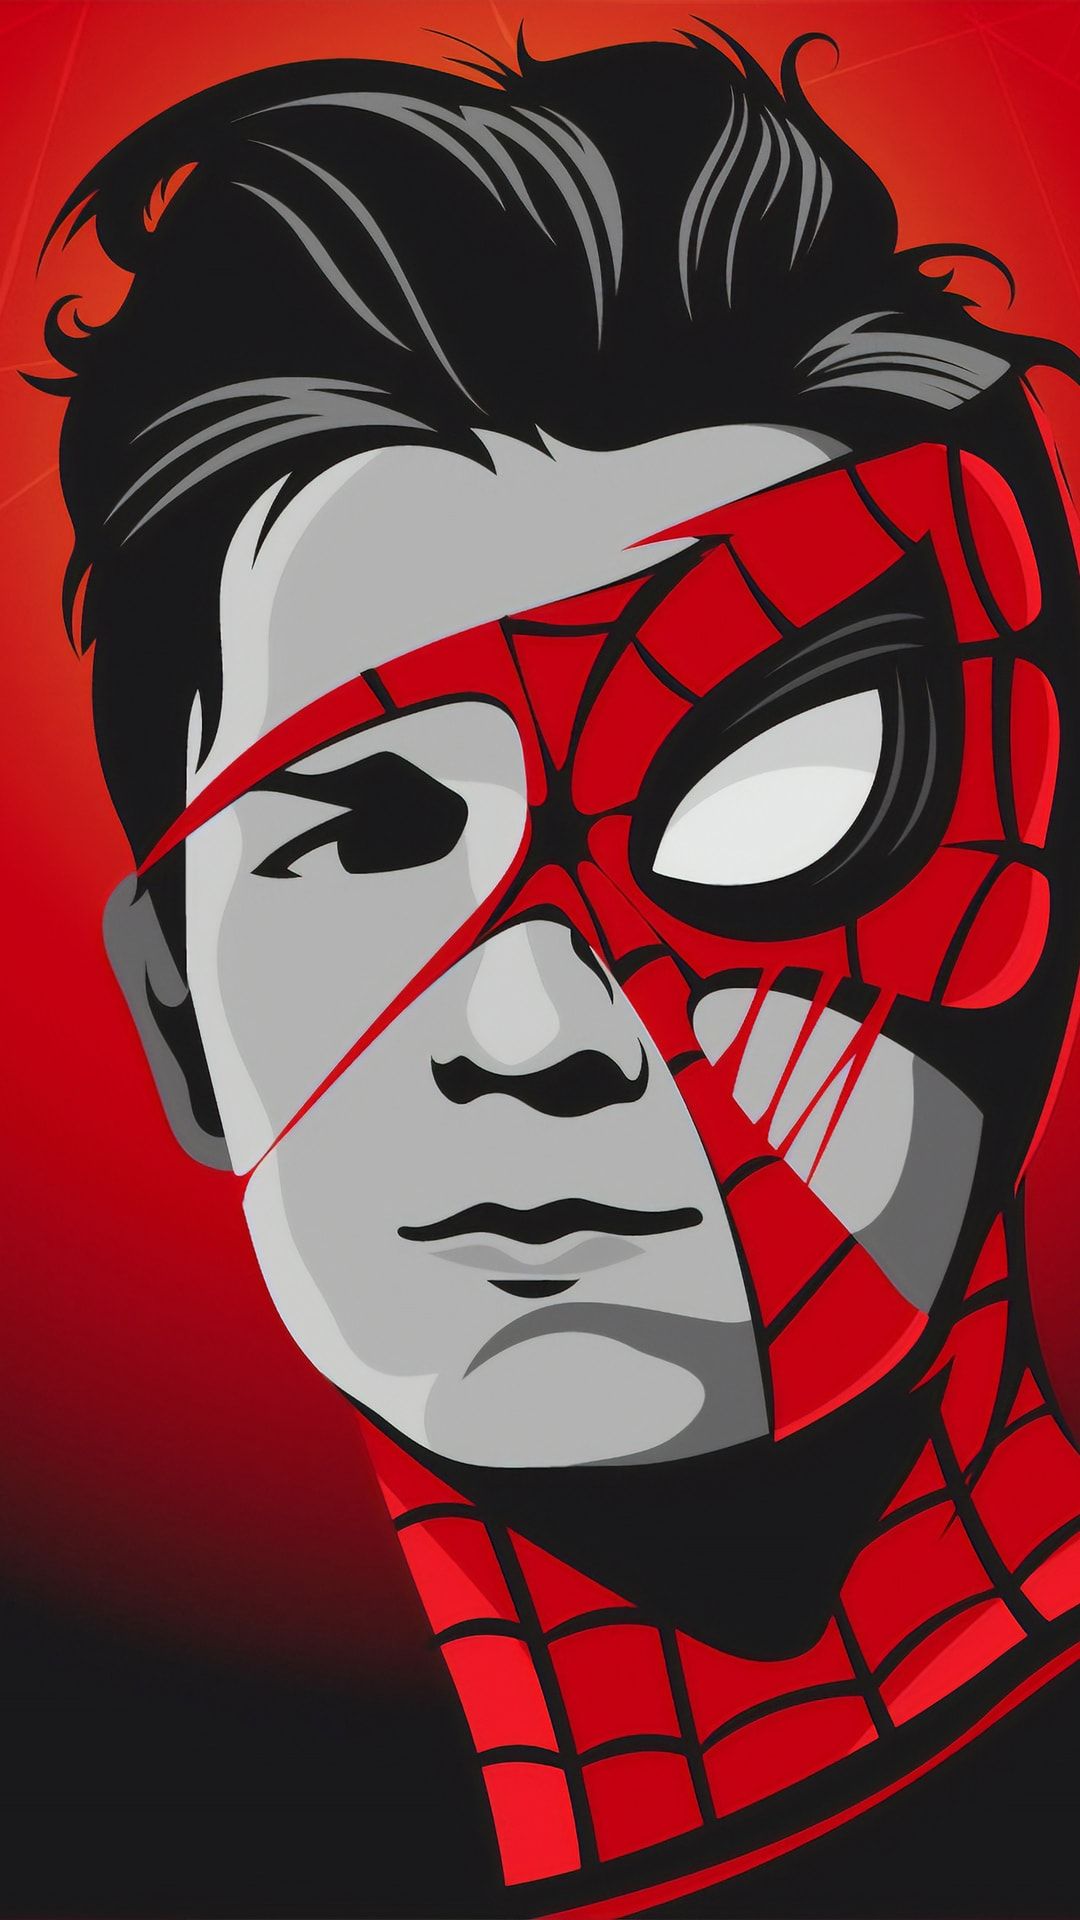 Tom Holland Spiderman Mask htc one wallpaper, free